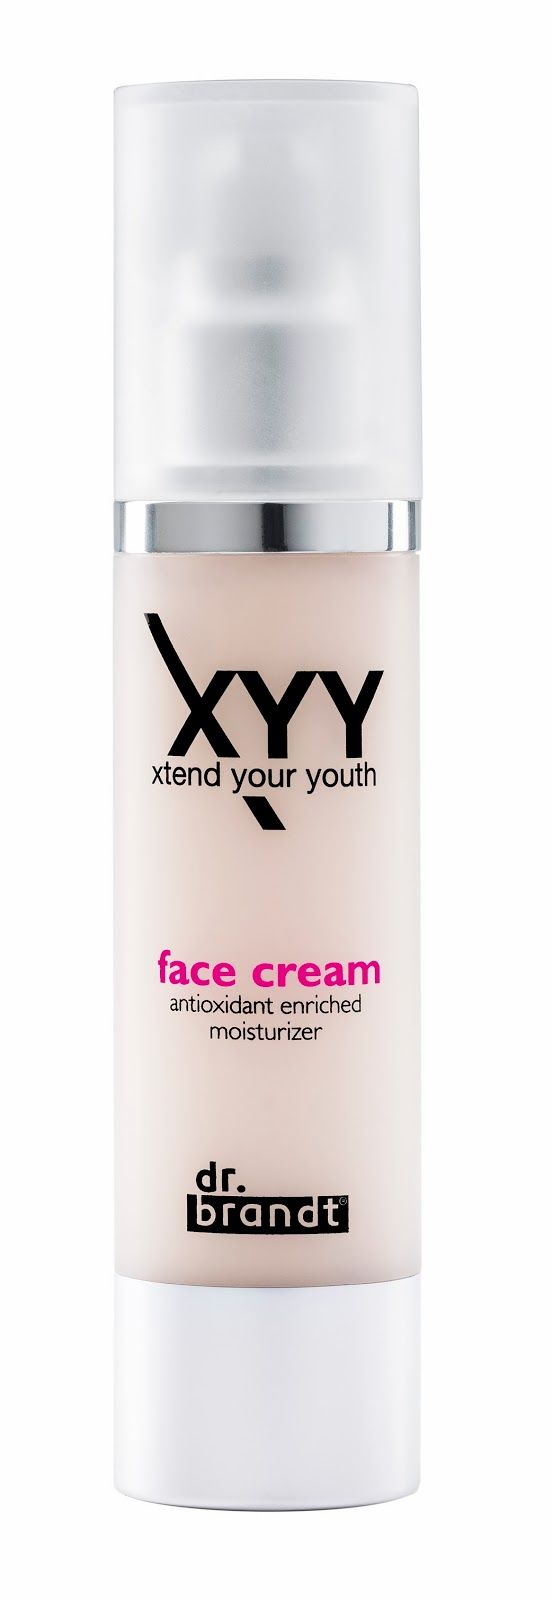 Xtend Your Youth face cream